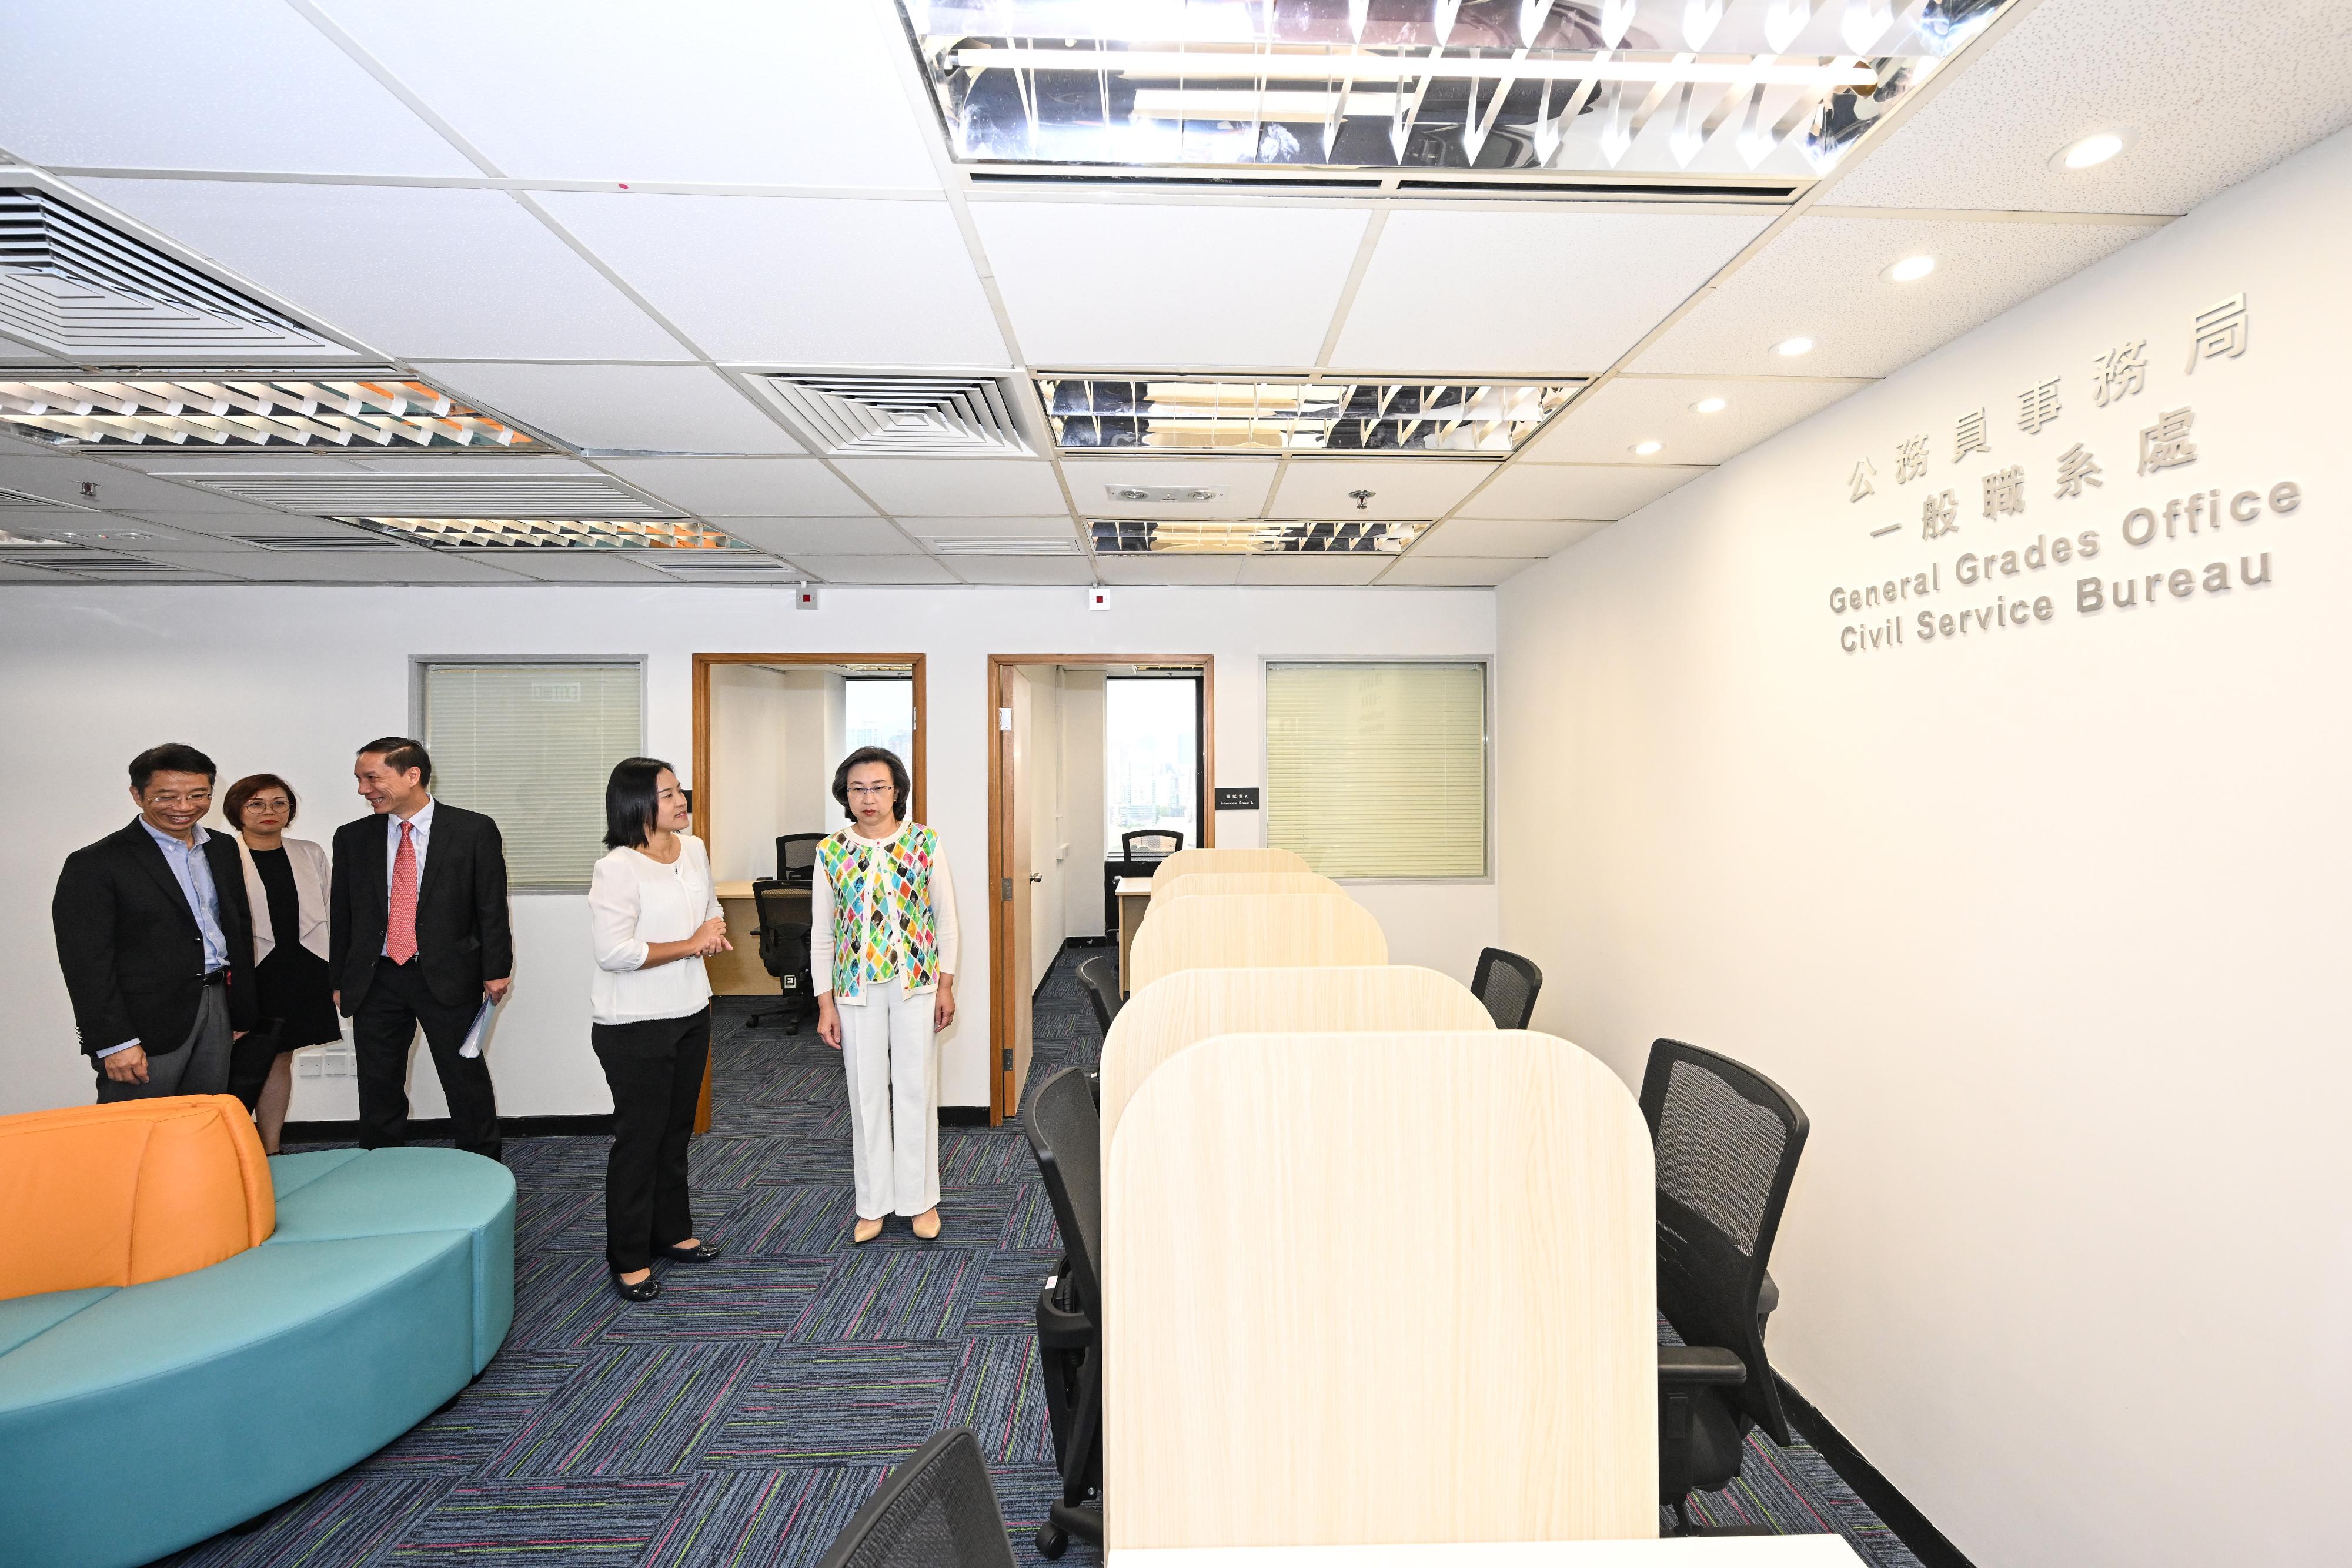 The Recruitment Centre, General Grades Office of the Civil Service Bureau officially commenced operation today (October 6) to conduct year-round recruitment for the posts of Assistant Clerical Officer, Clerical Assistant and Personal Secretary II. Photo shows the Secretary for the Civil Service, Mrs Ingrid Yeung (first right), visiting the interview area for eligible applicants to have their selection interviews.